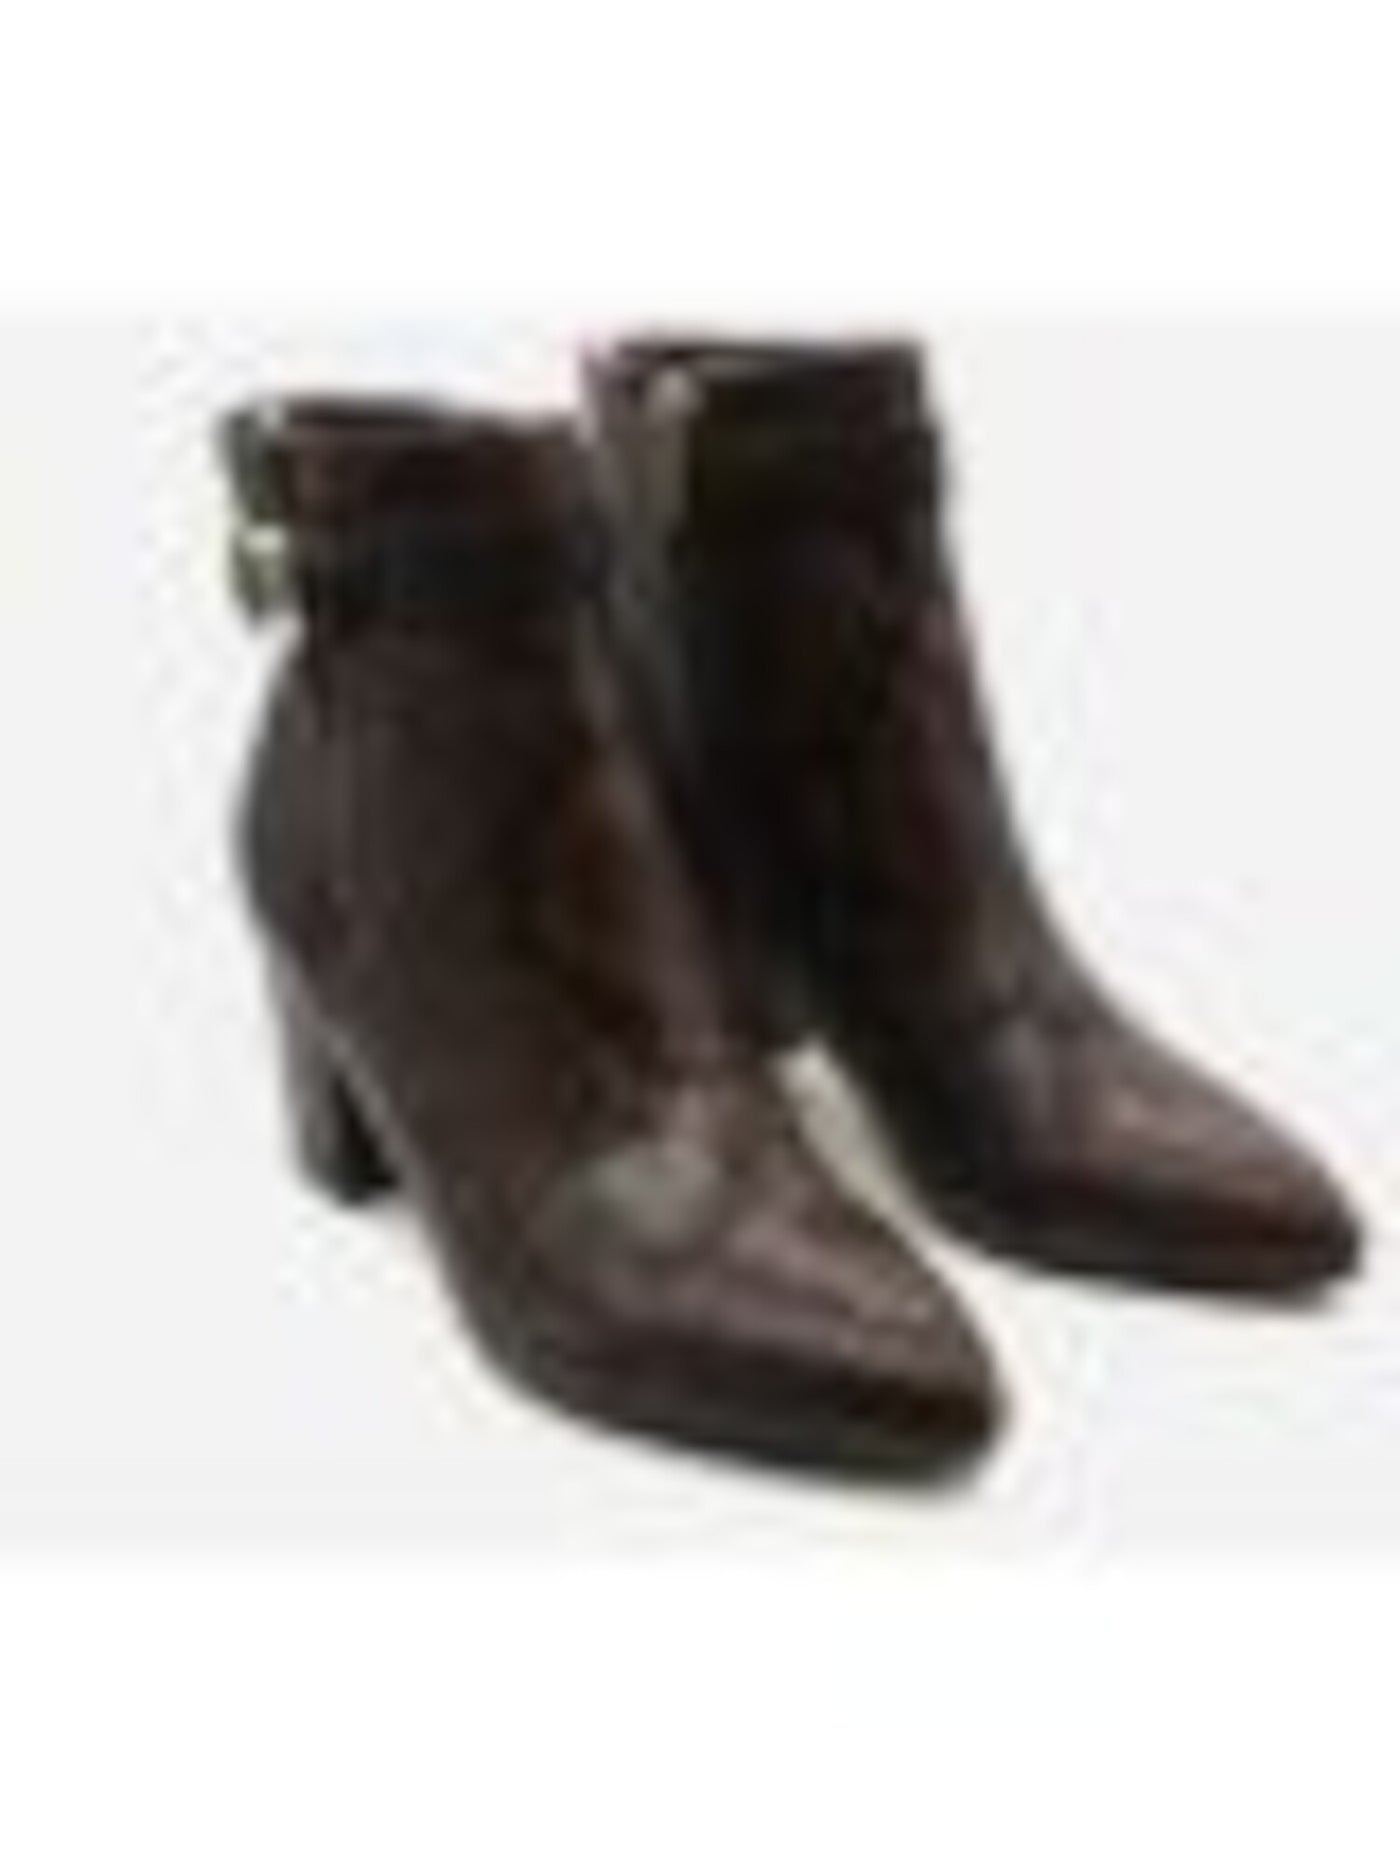 TOMMY HILFIGER Womens Brown Mixed Material Cushioned Buckle Accent Halliri Pointed Toe Block Heel Zip-Up Dress Booties 7.5